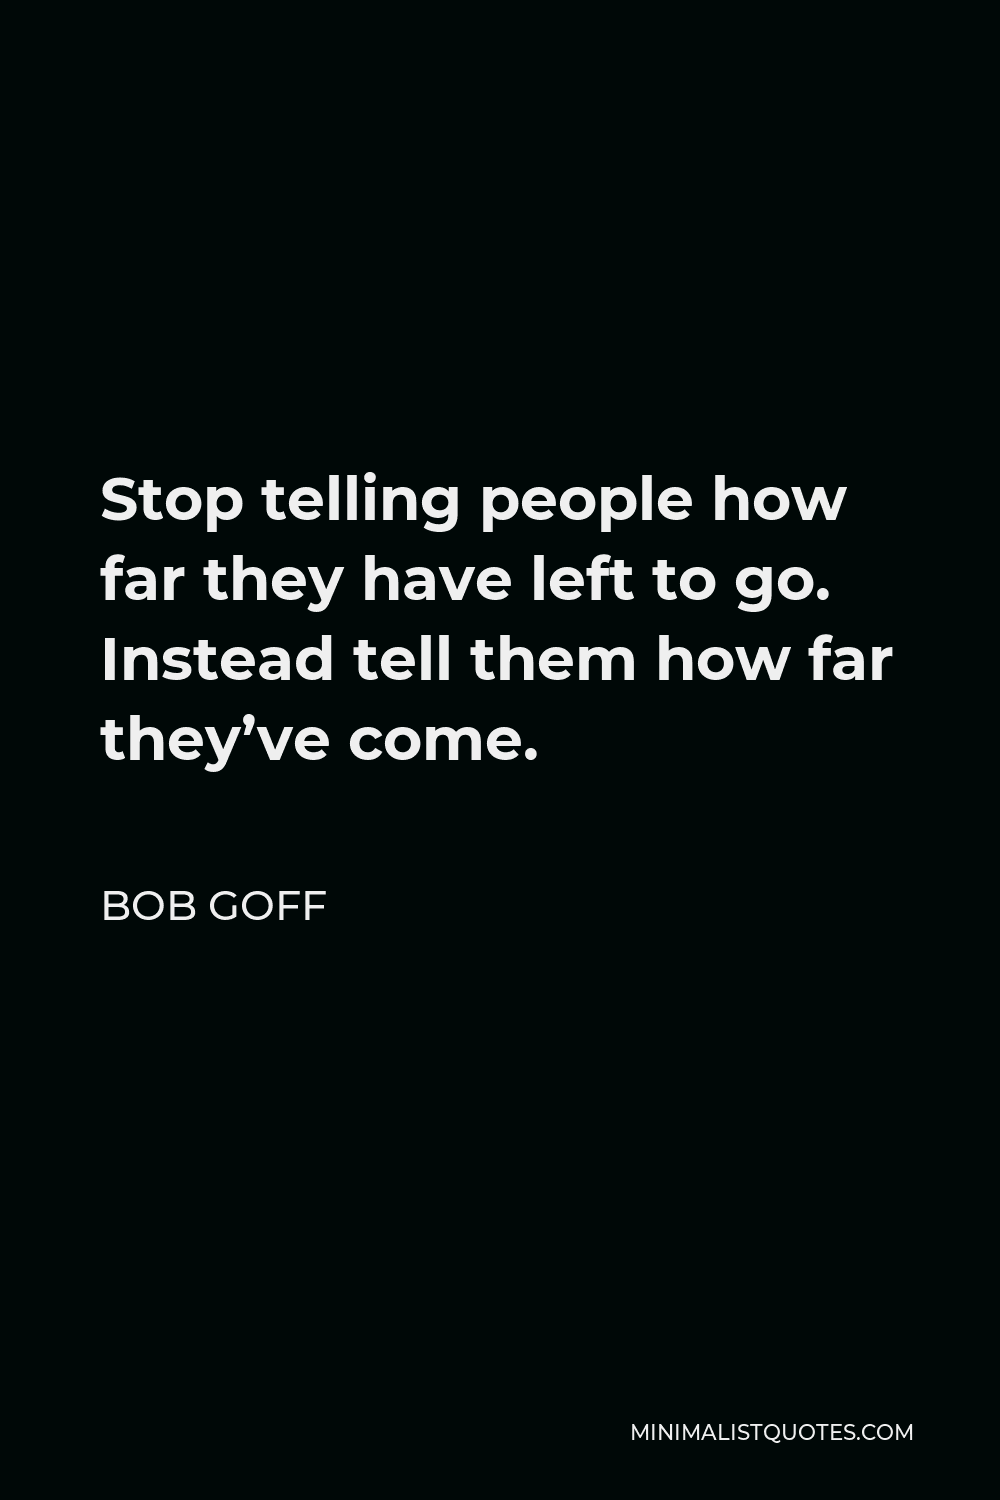 Bob Goff Quote - Stop telling people how far they have left to go. Instead tell them how far they’ve come.